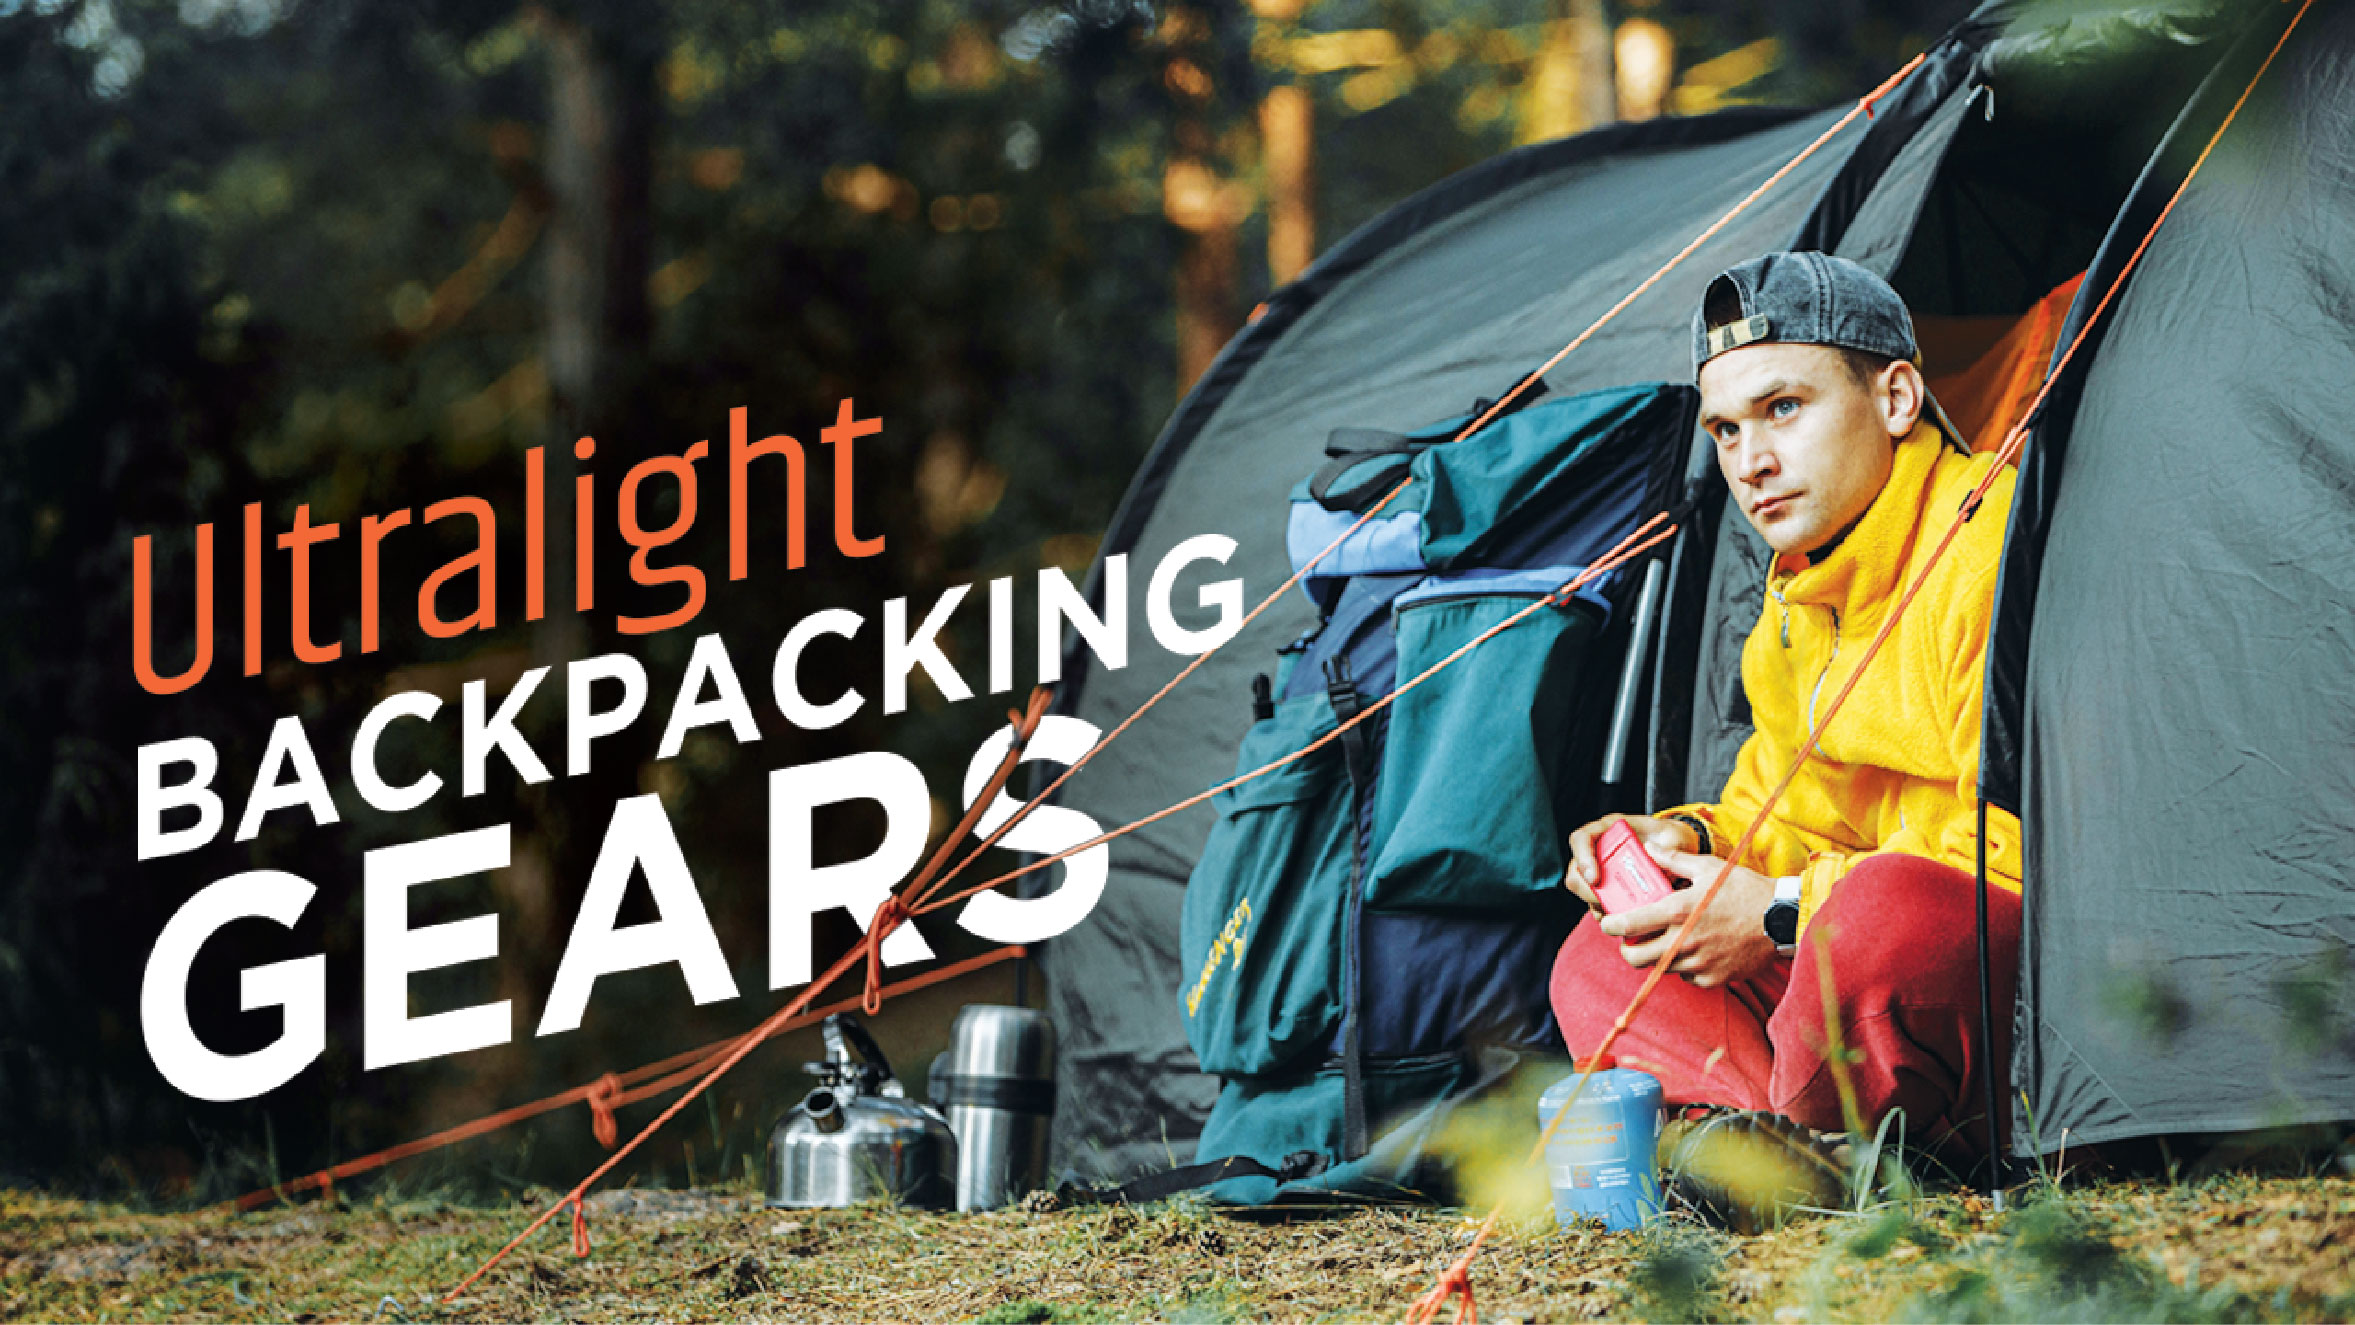 Must Have Ultralight Backpacking Gears-Essential Guide to Backpacking Gears